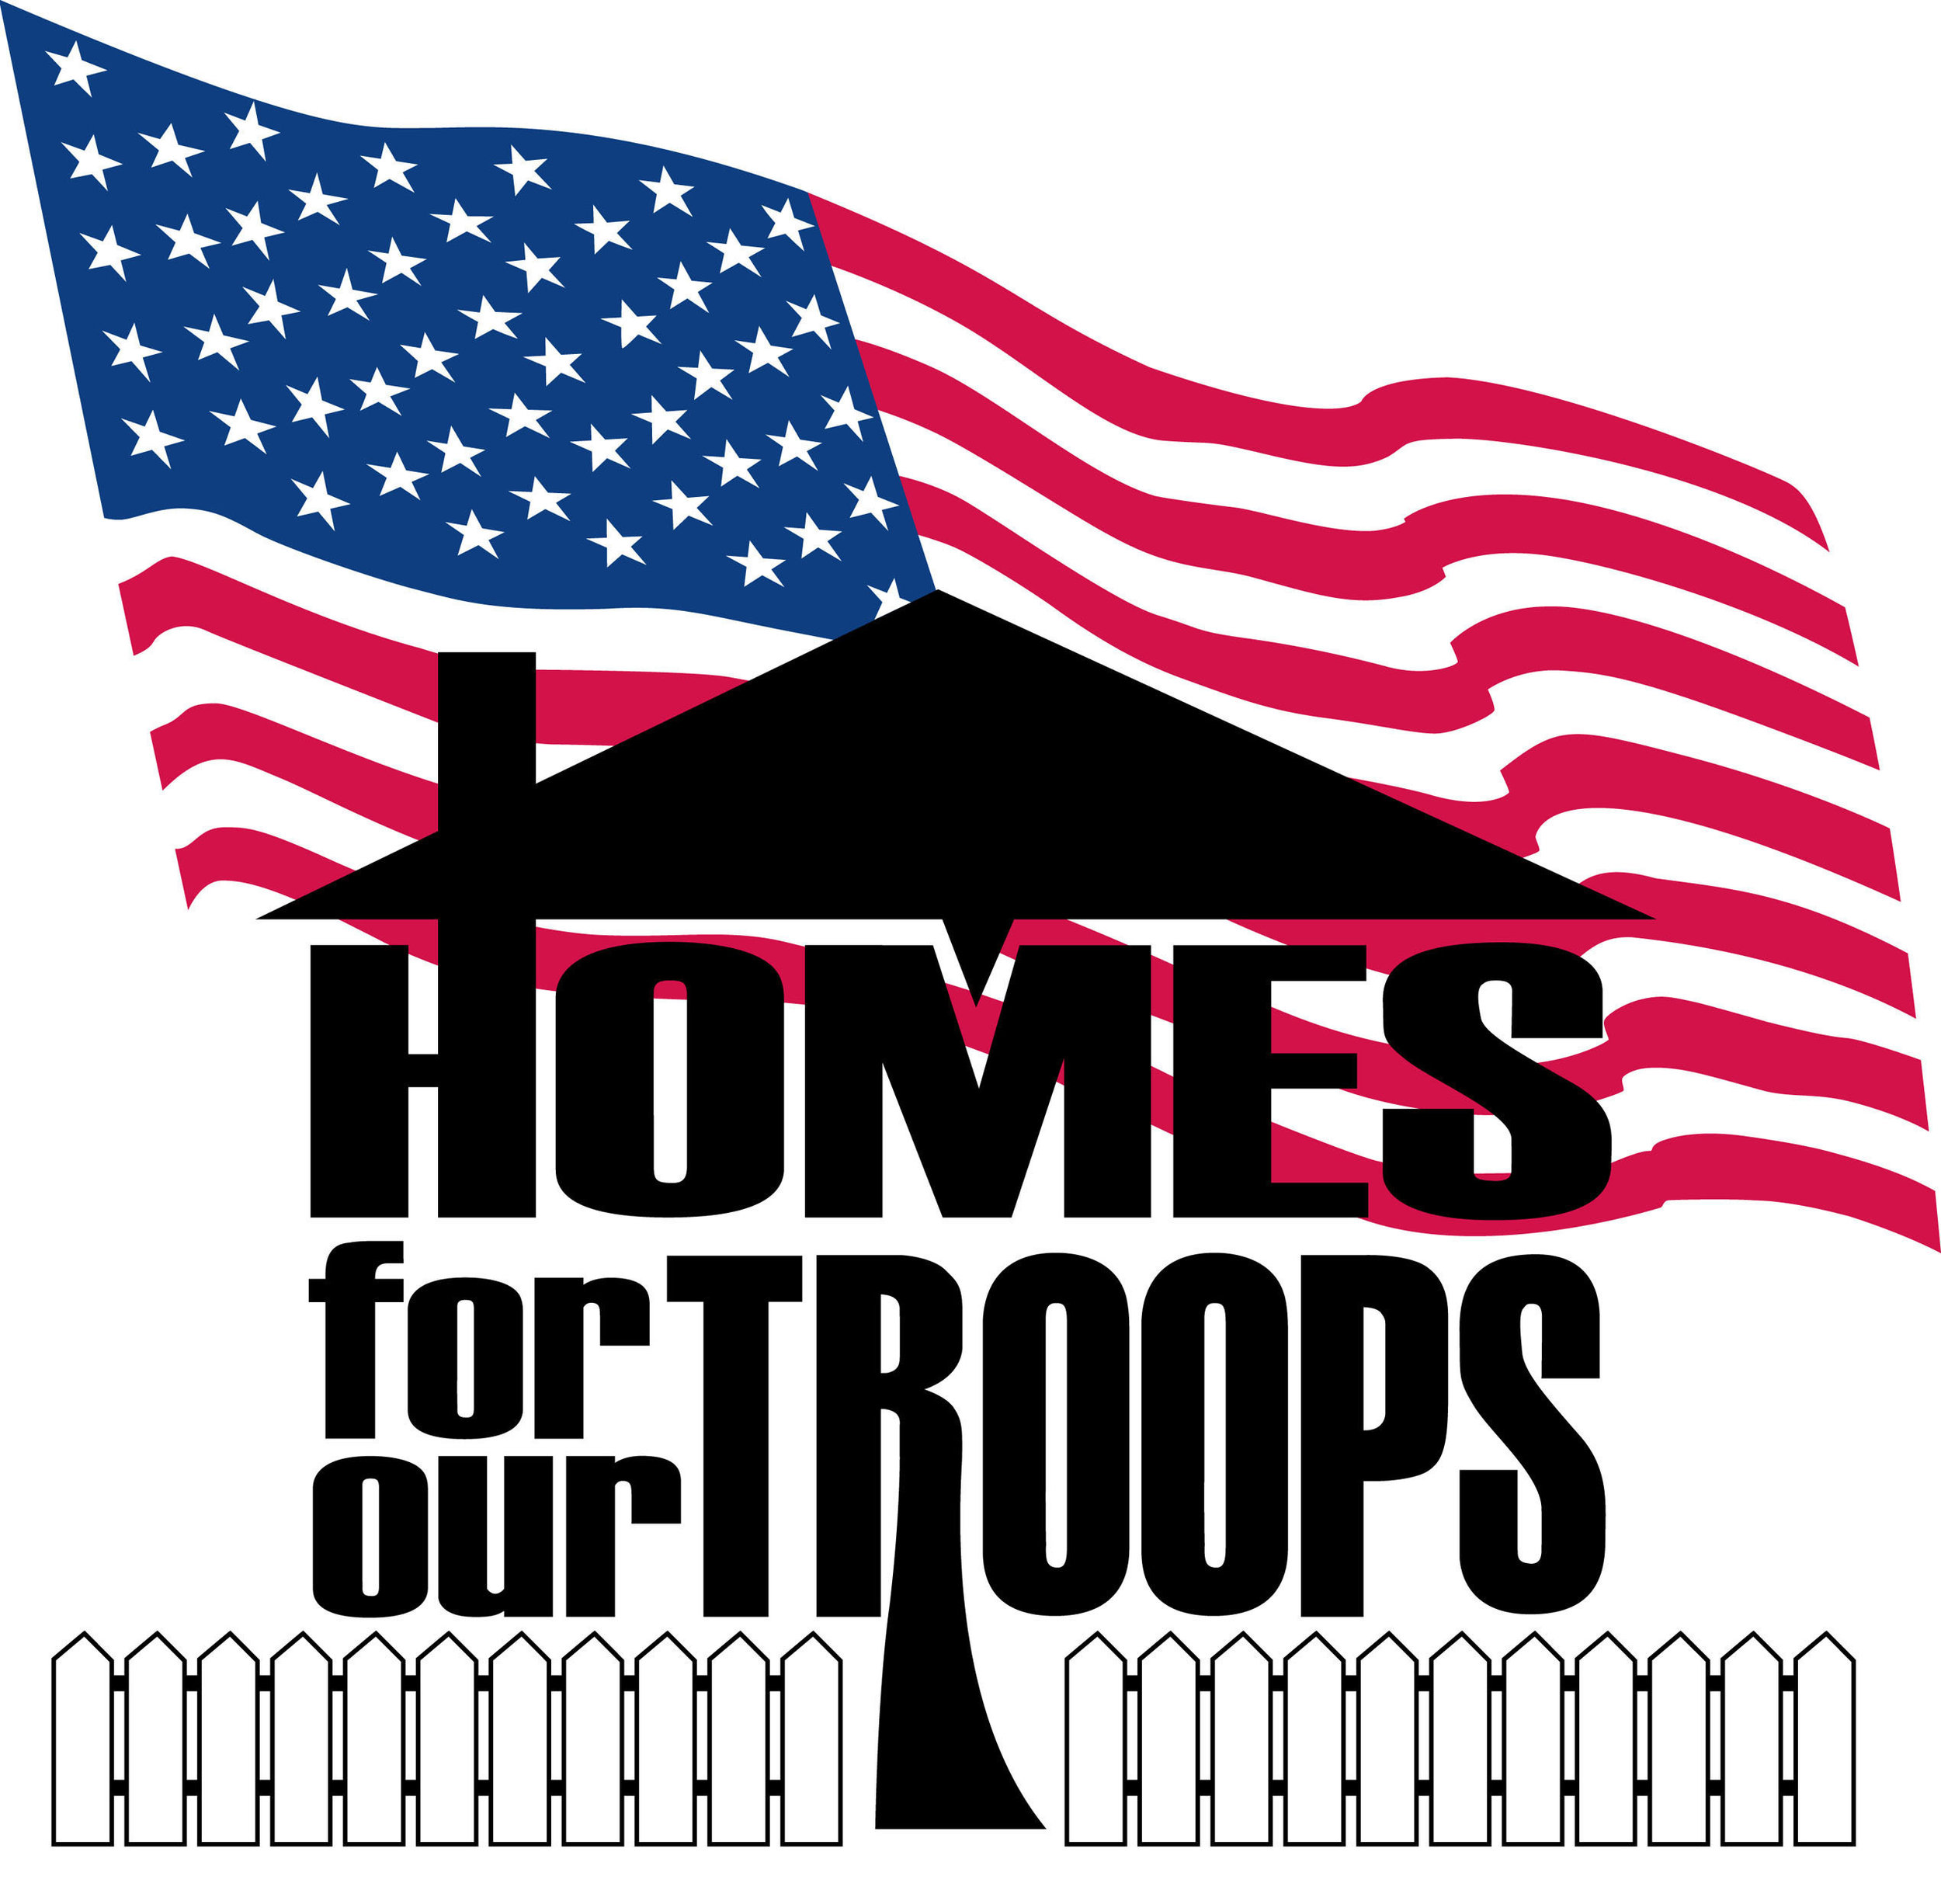 PRN-HOMES-FOR-OUR-TROOPS-LOGO-912-1y-4-1-1-1-1High.jpg